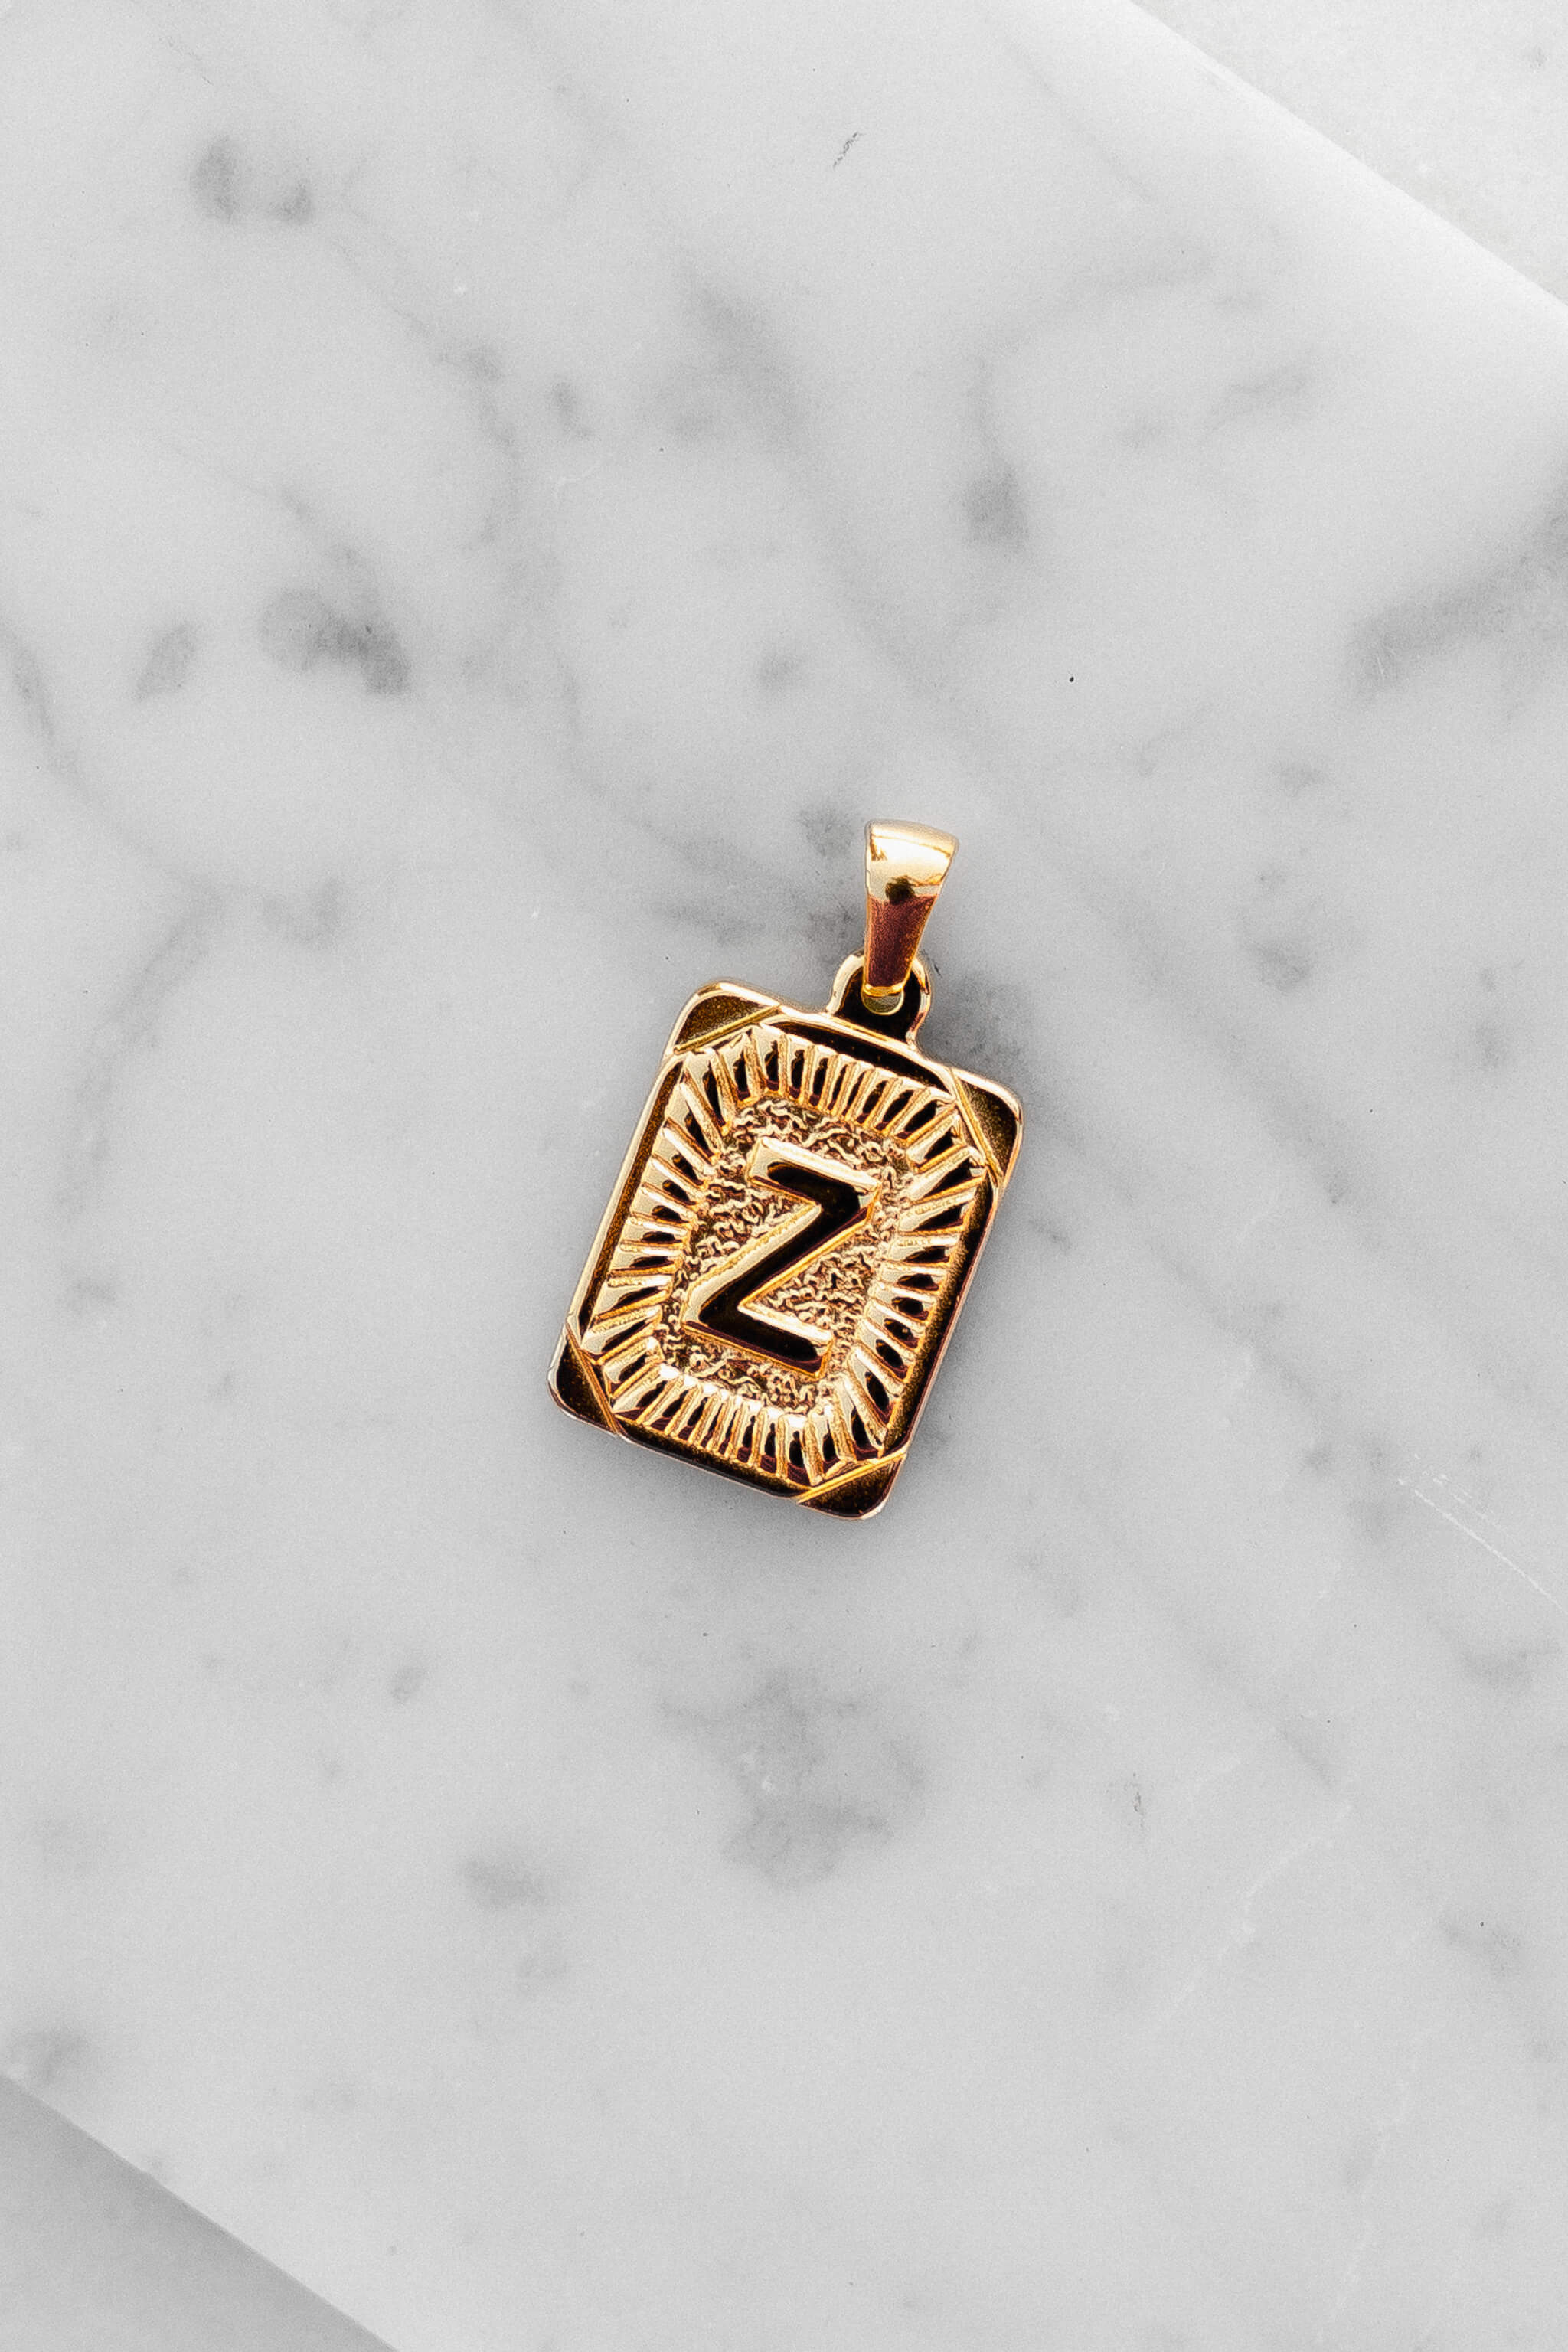 Gold Monogram Letter "Z" Charm laying on a marble